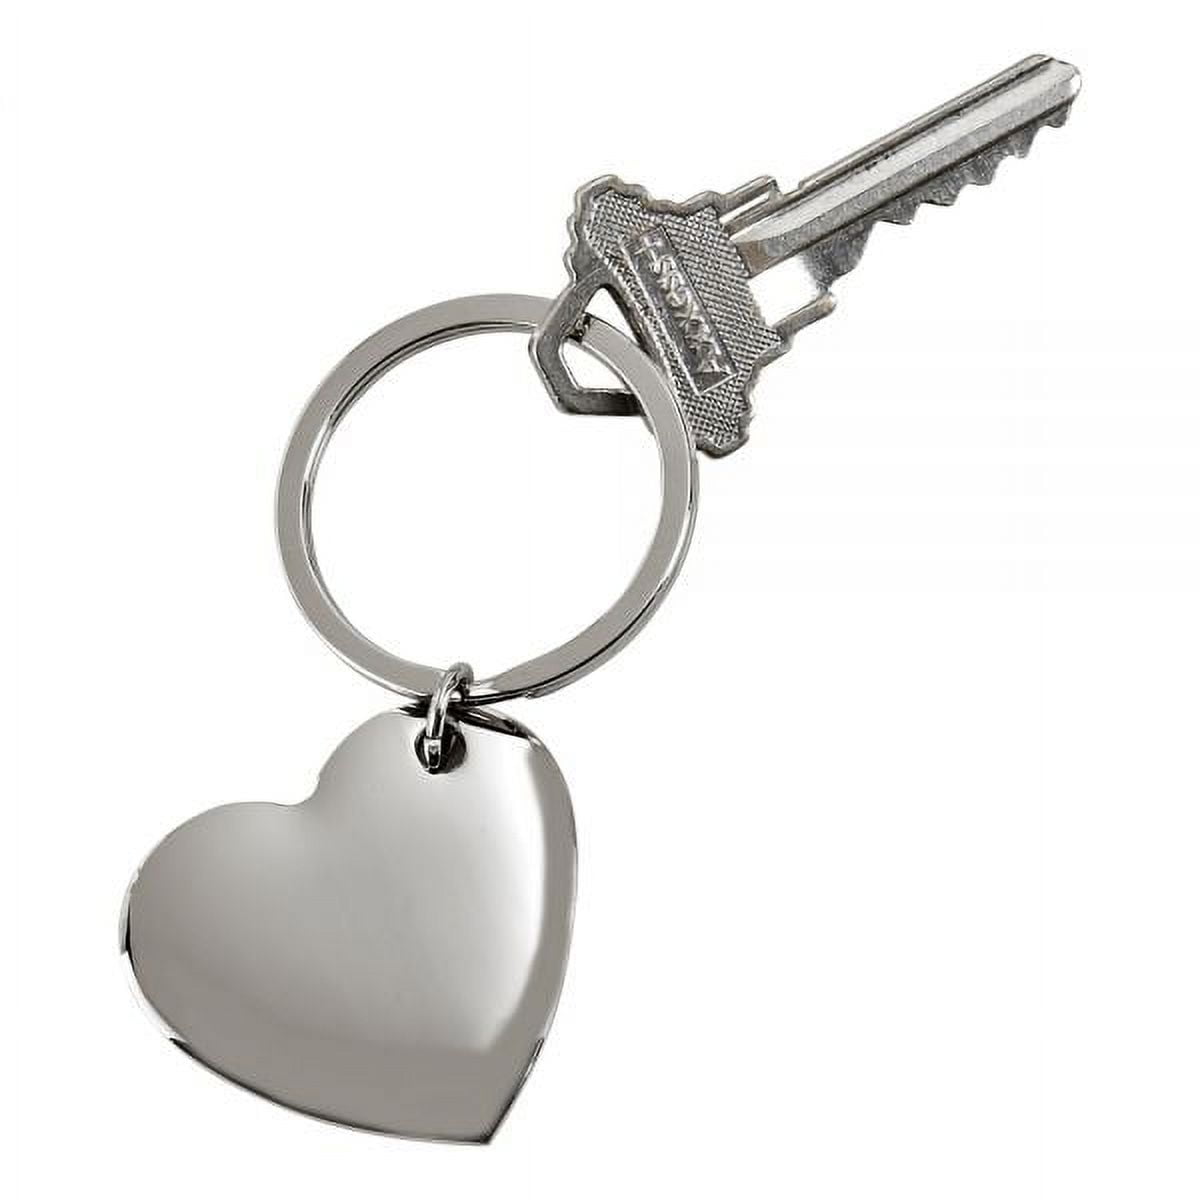 002507 1.5 x 1.5 in. Cupid Heart Shaped Key Ring, Nickel Plated - Silver -  Creative Gifts International